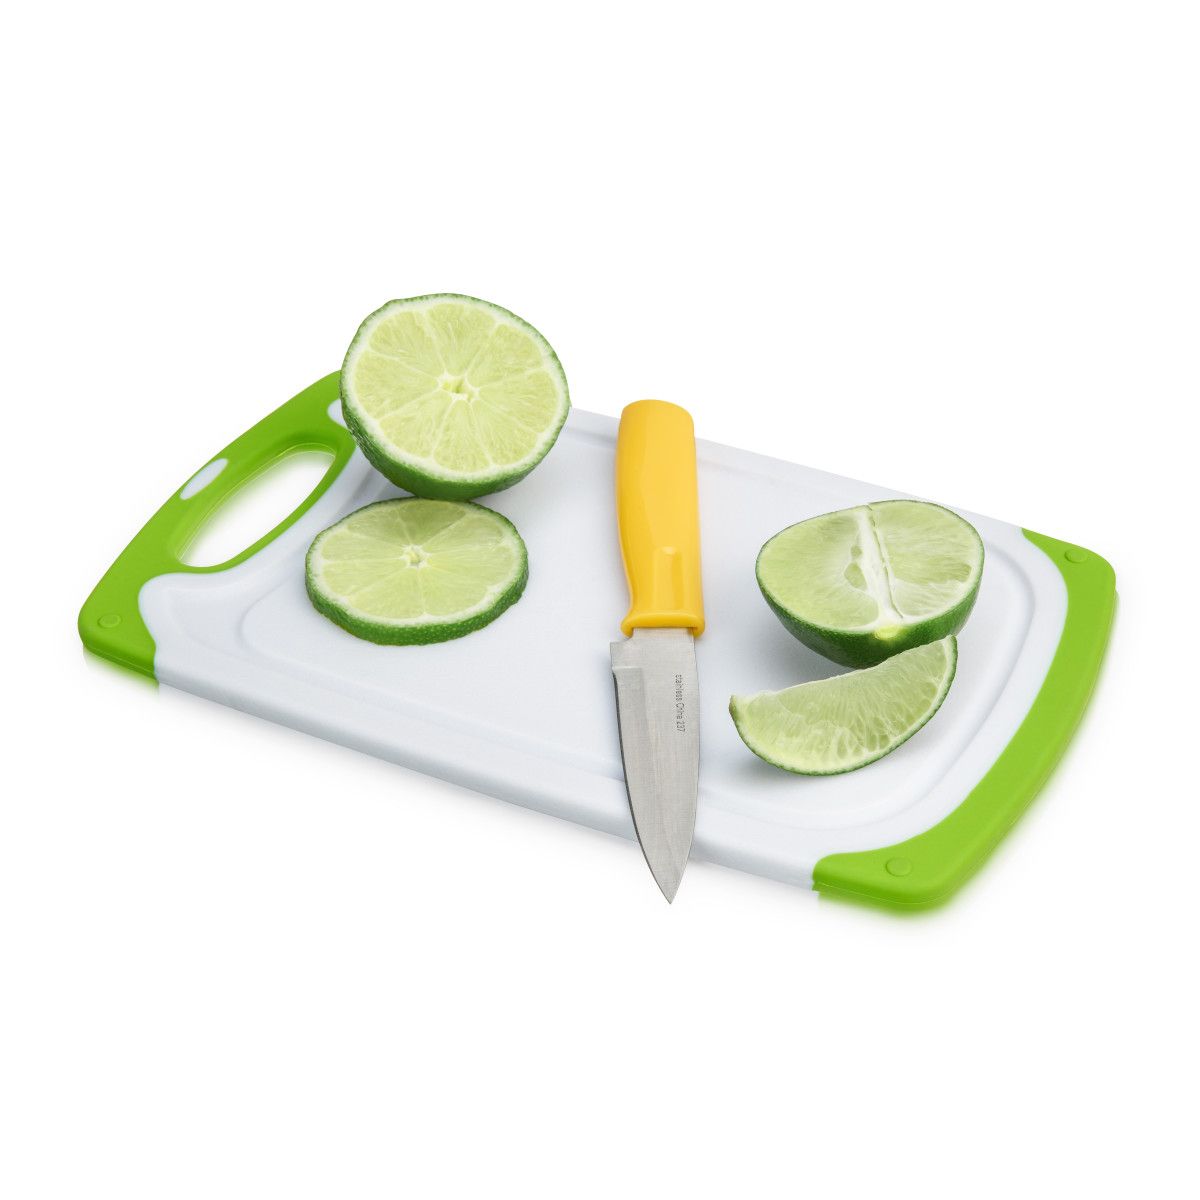 Cheap Set Of 4 Knives + Scissors + Matching Cutting Board- Khaki Green and  Assorted Yellow